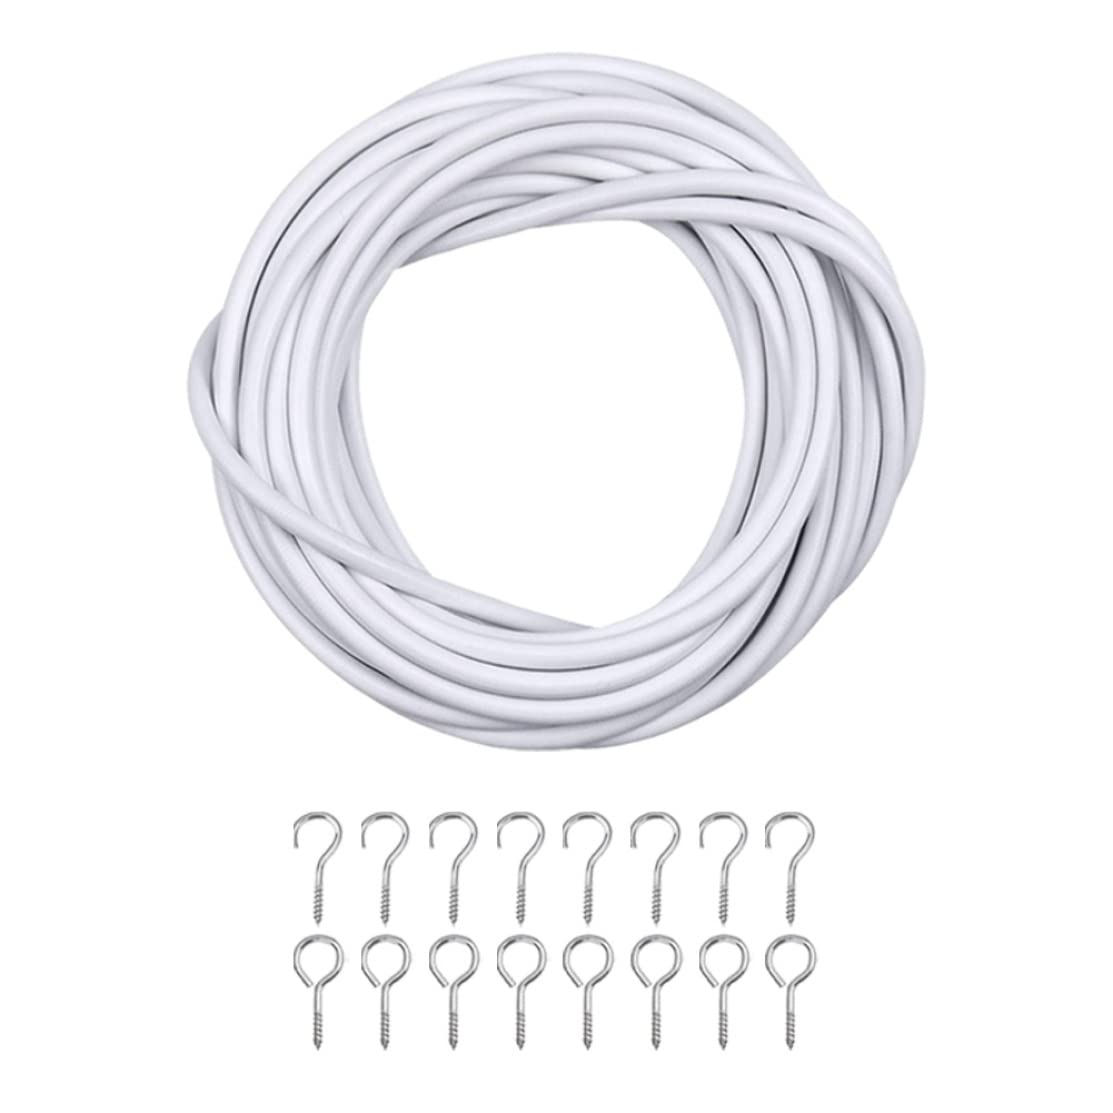 FOLAI 3Meter white Curtain Wire Hanging Cord Kit with 6 Pack Self-adhesive 6 of 